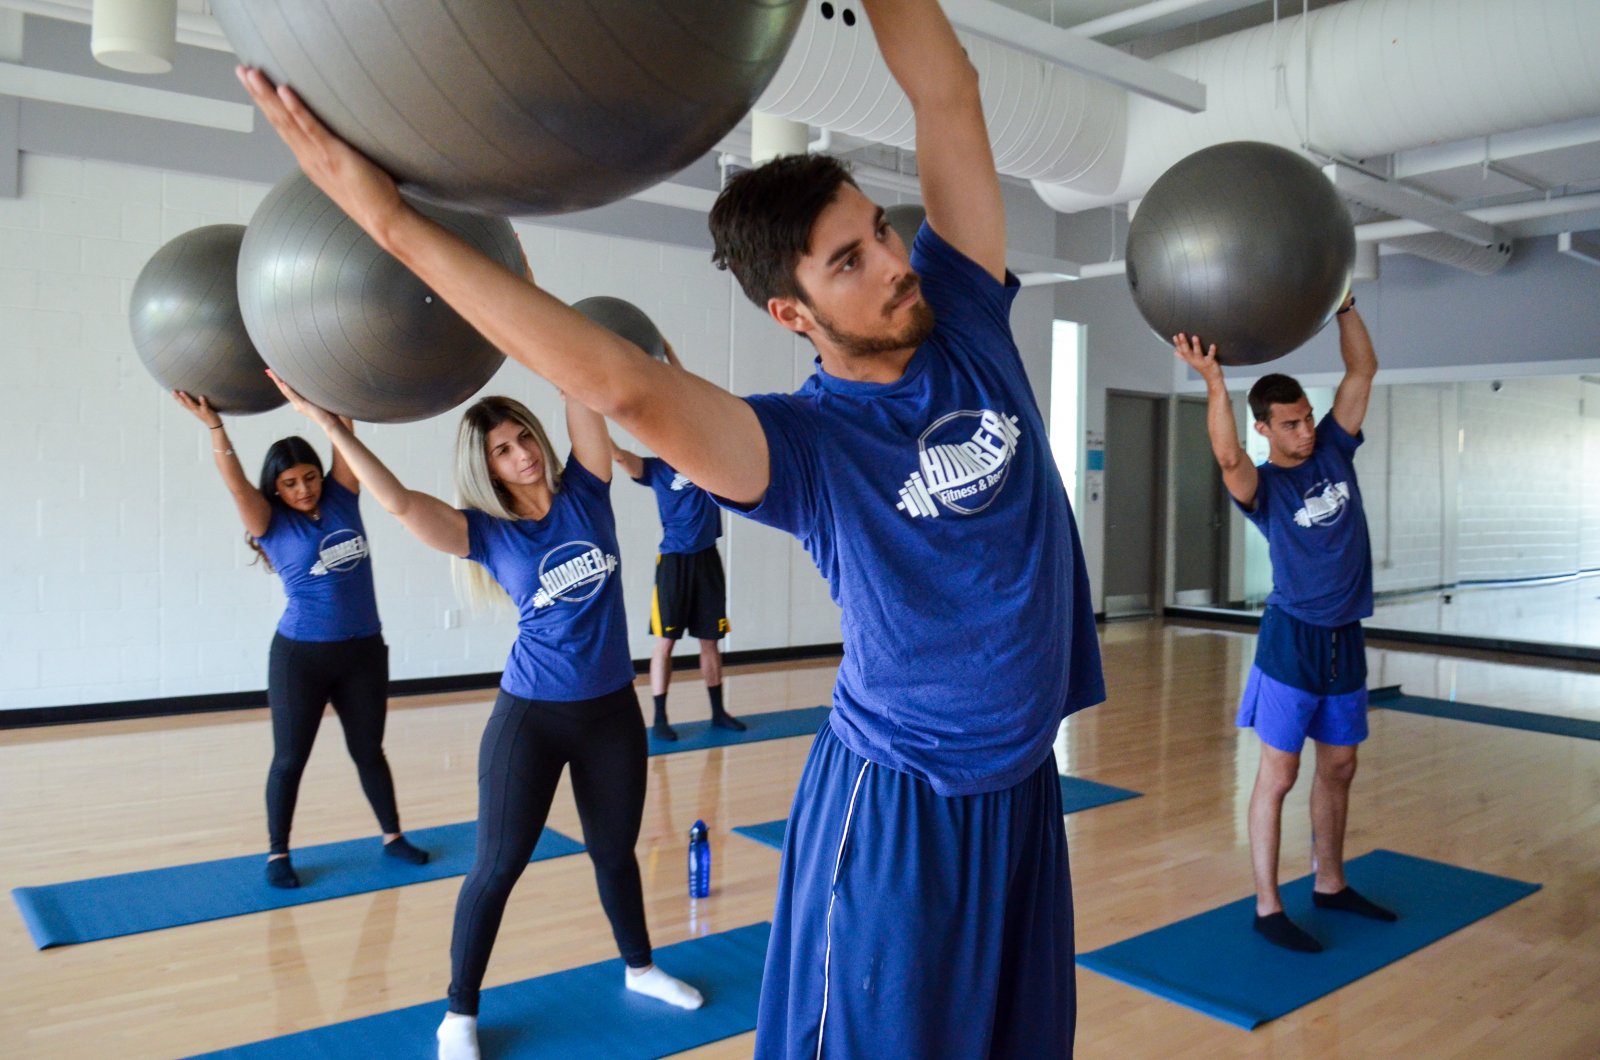 A gym glass - students dressed in blue shirts hold exercise balls over their heads.